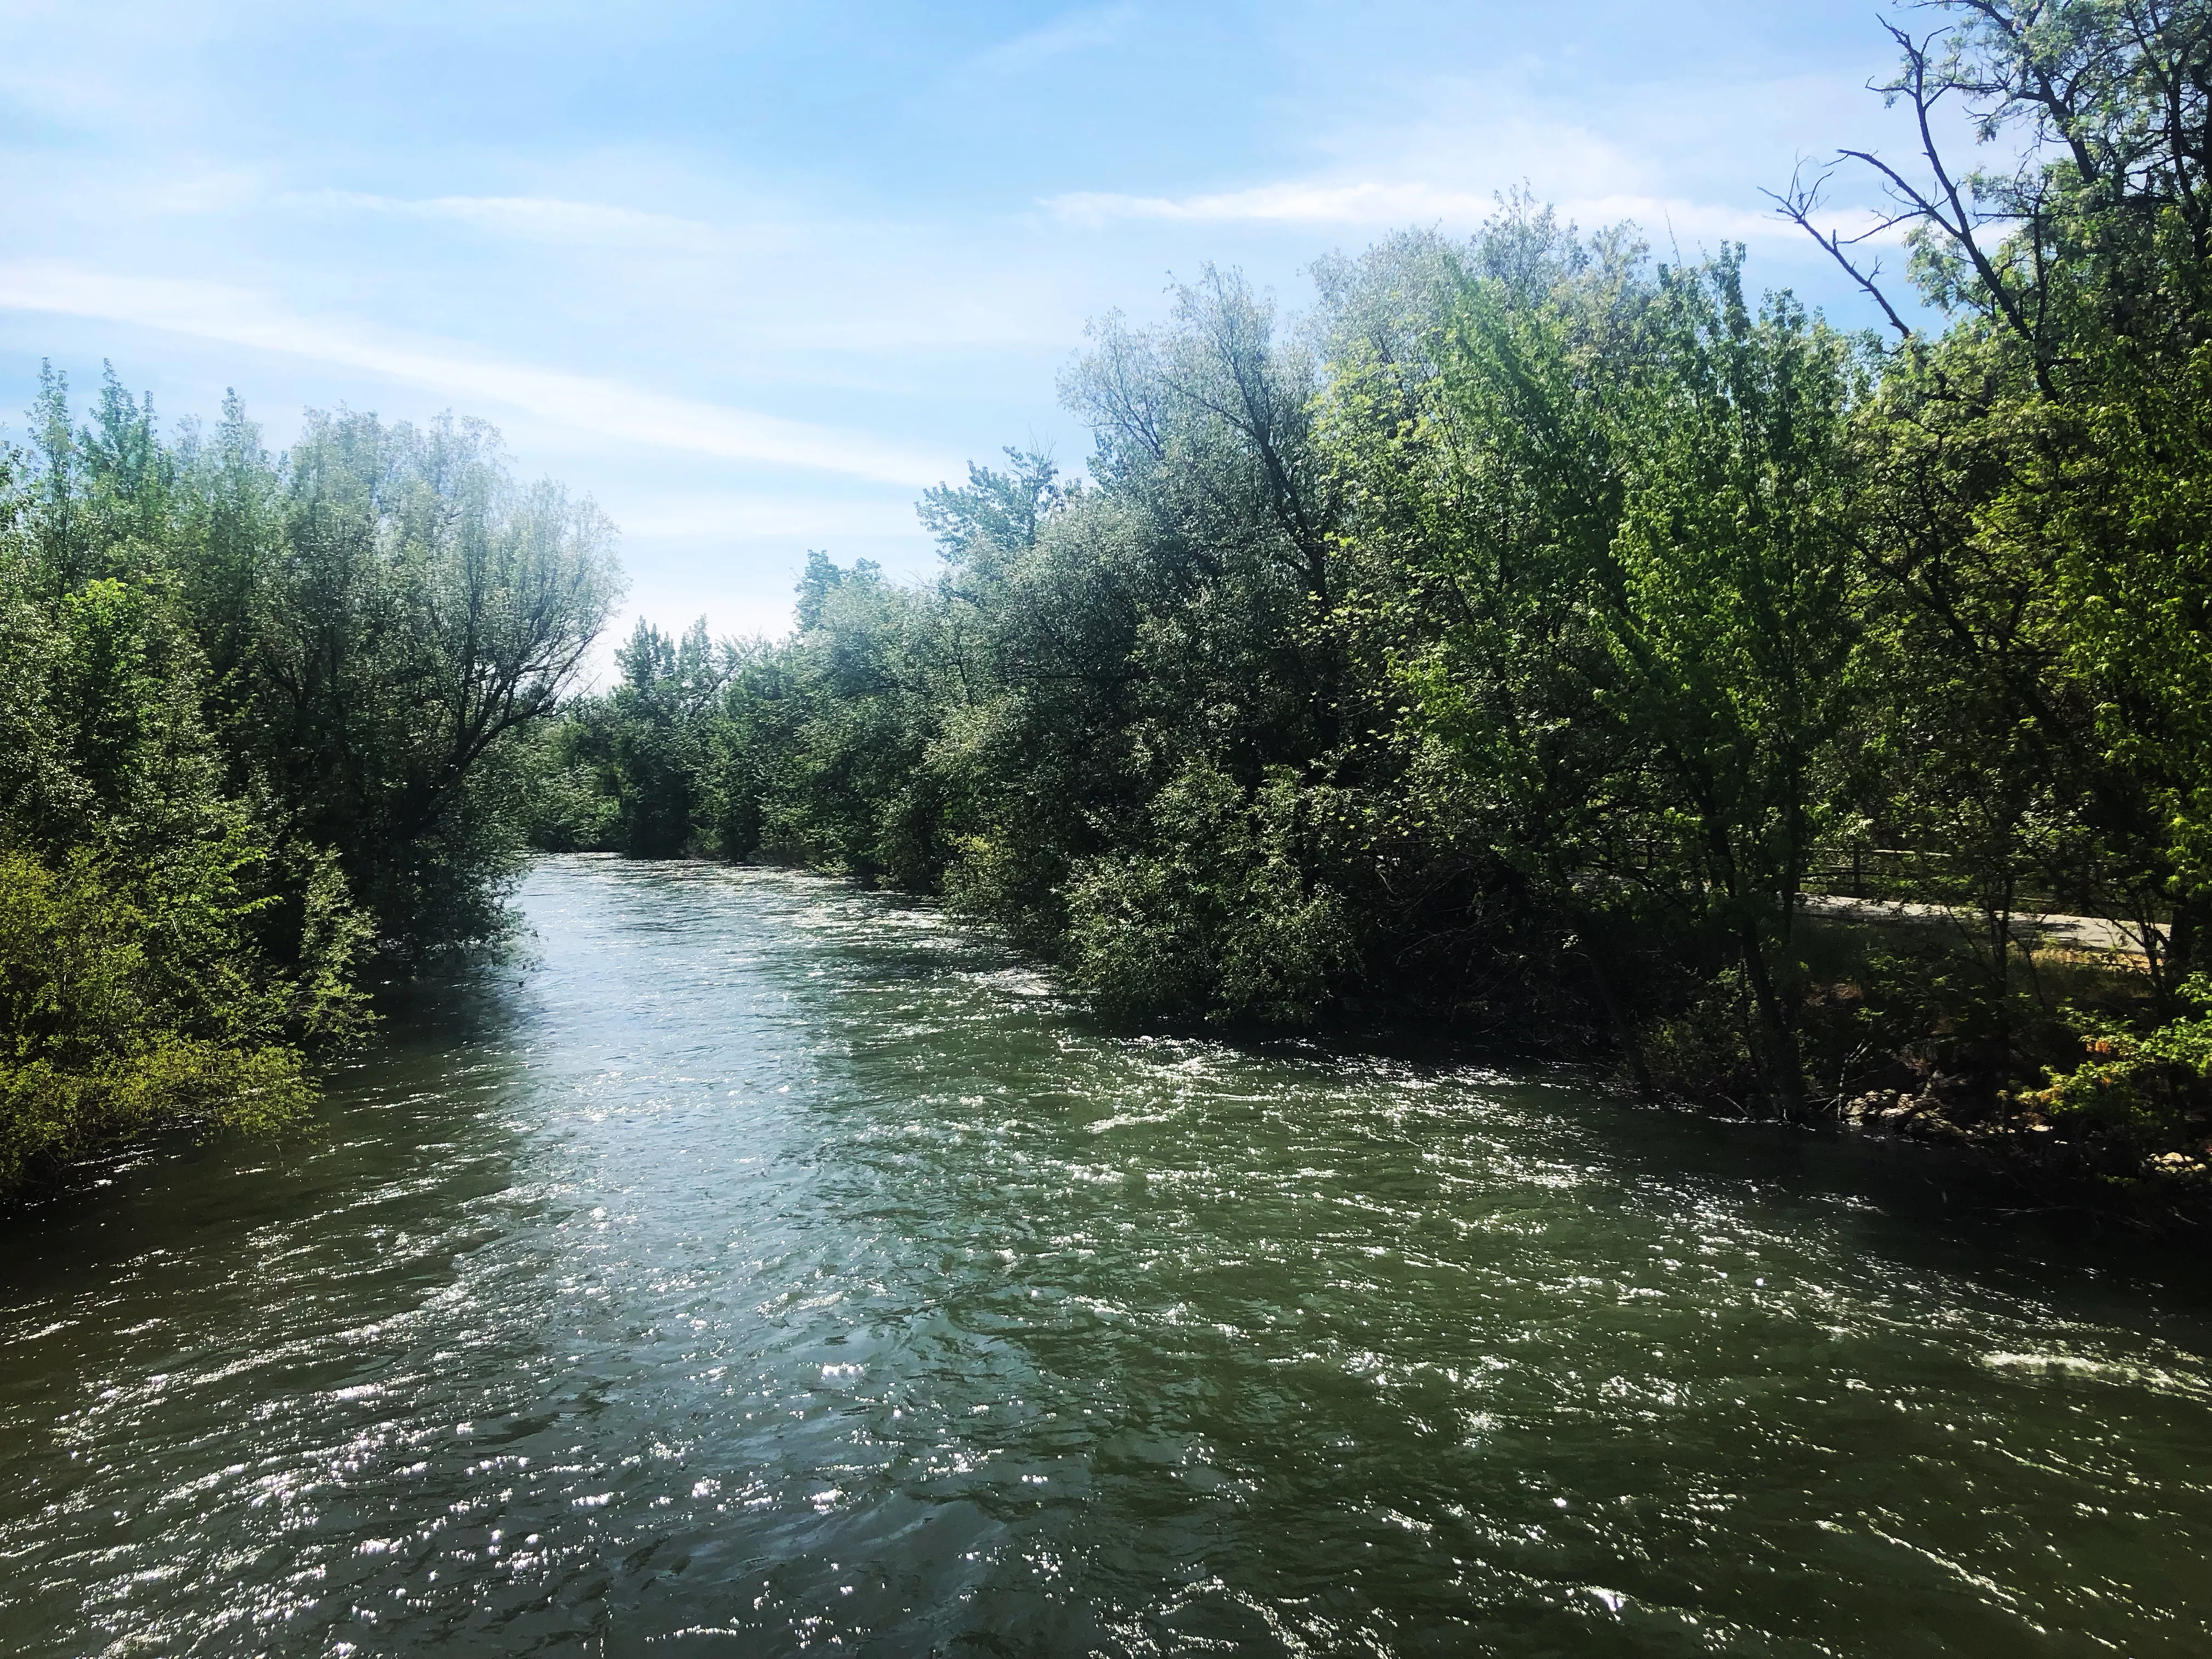 Picture of the Boise River